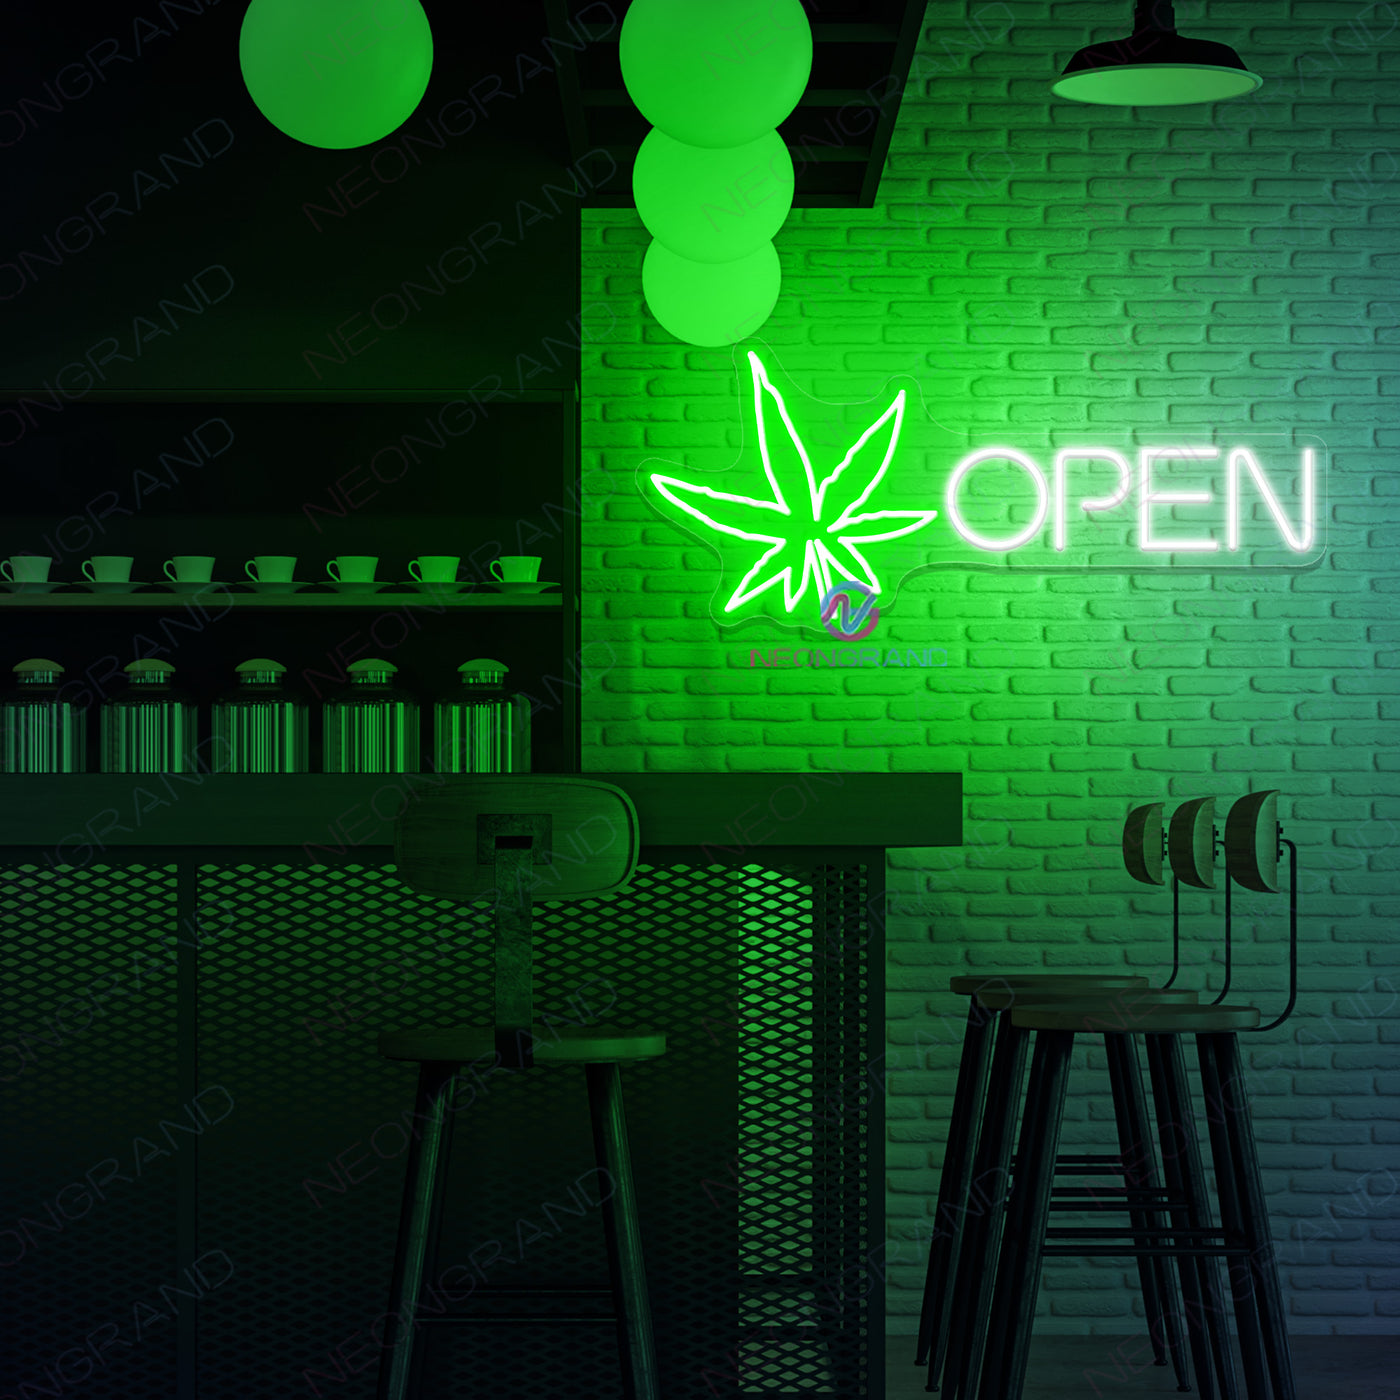 Open Weed Neon Sign Cannabis Led Light white